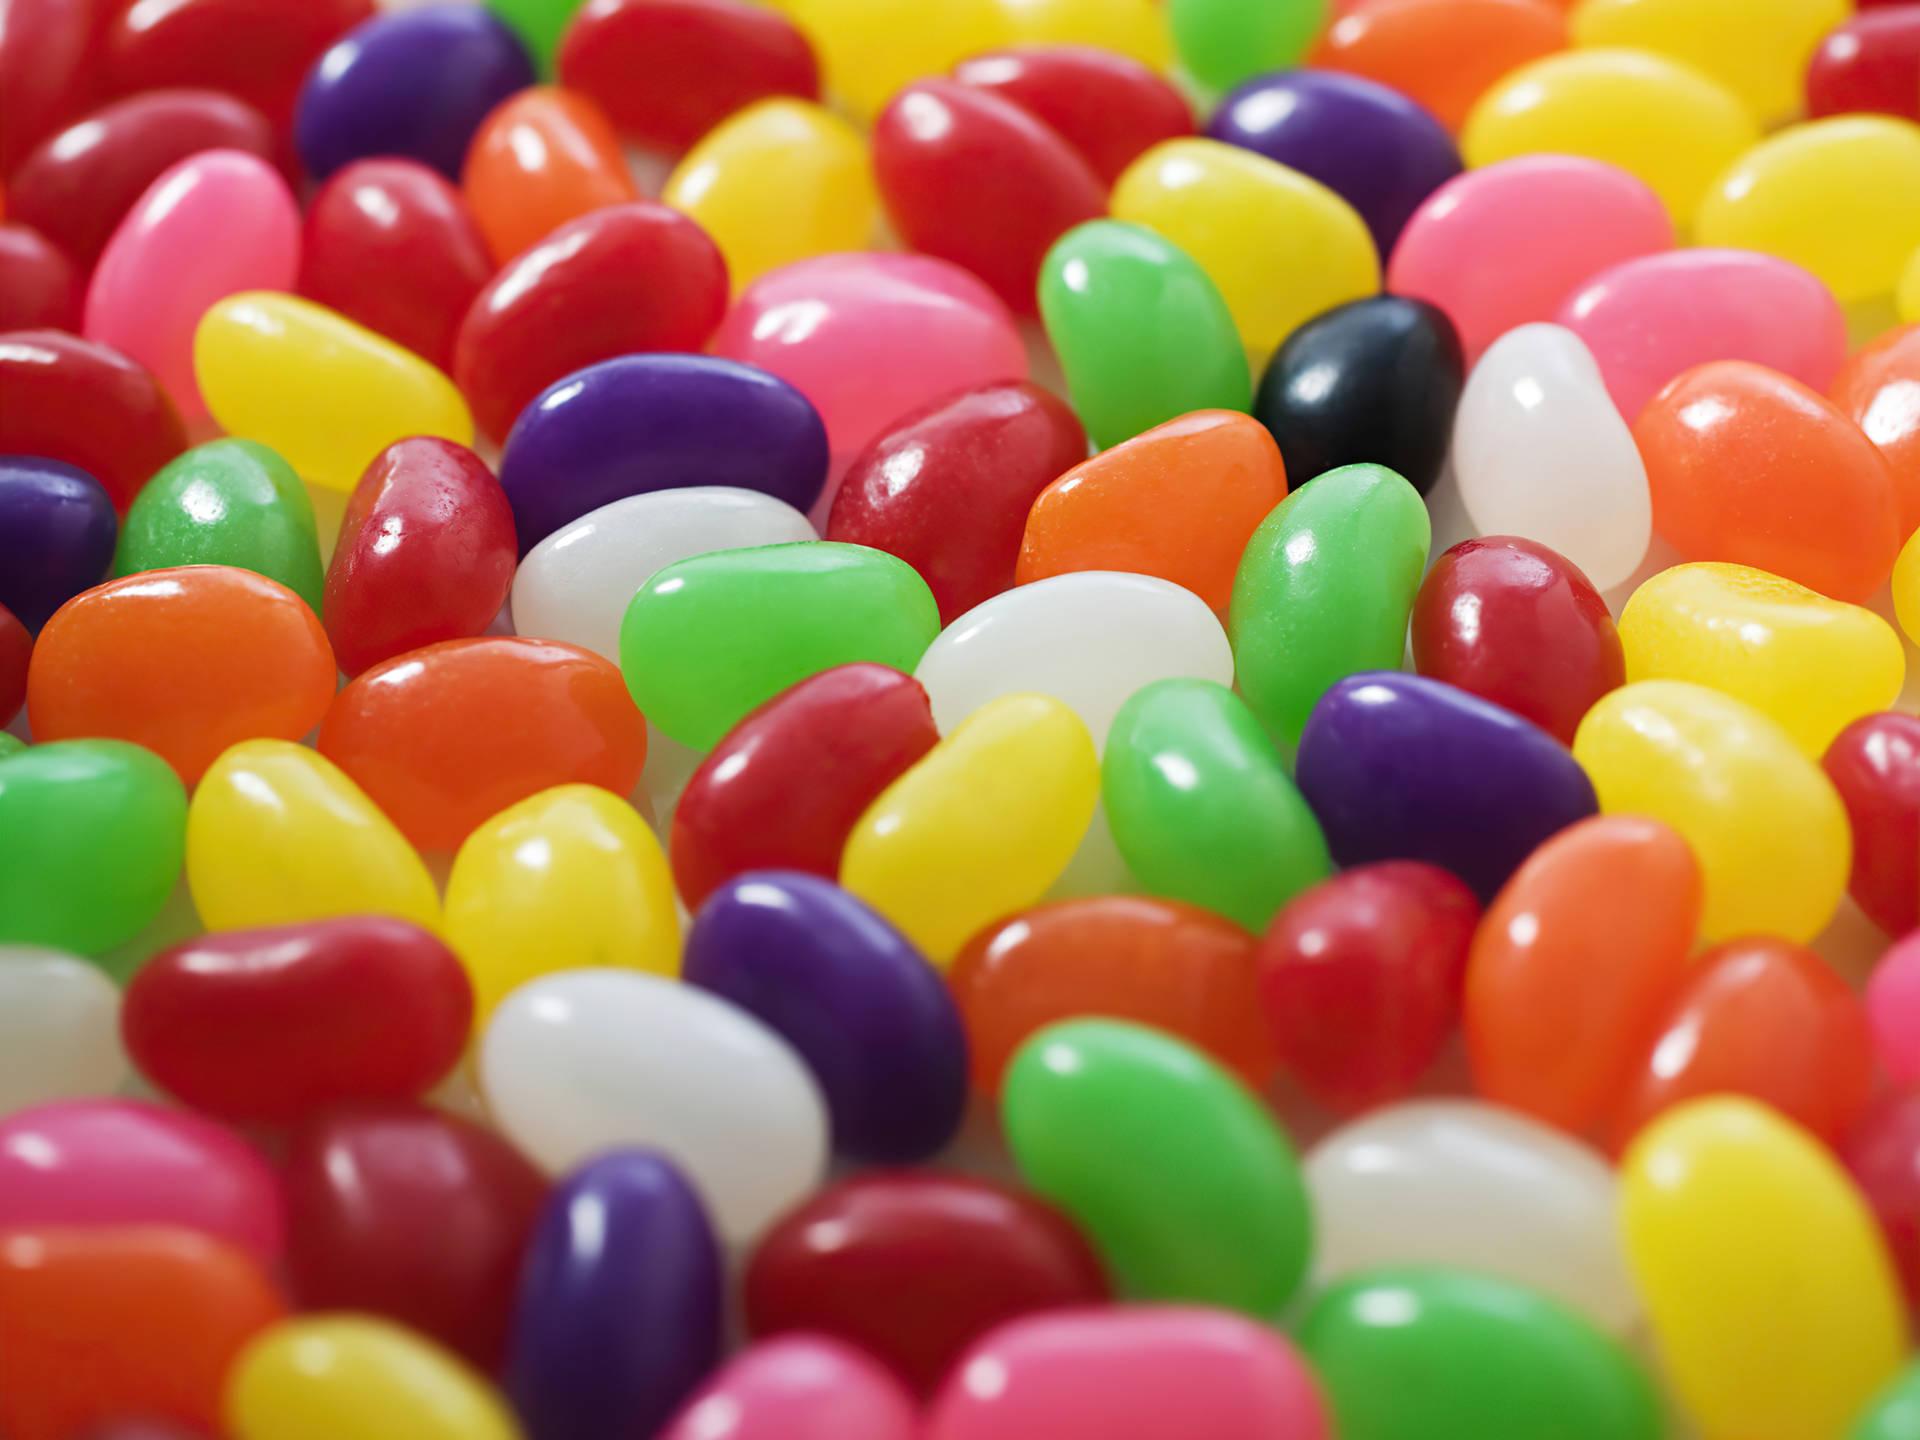 Transform Your Android With A Vibrant Jelly Bean Theme